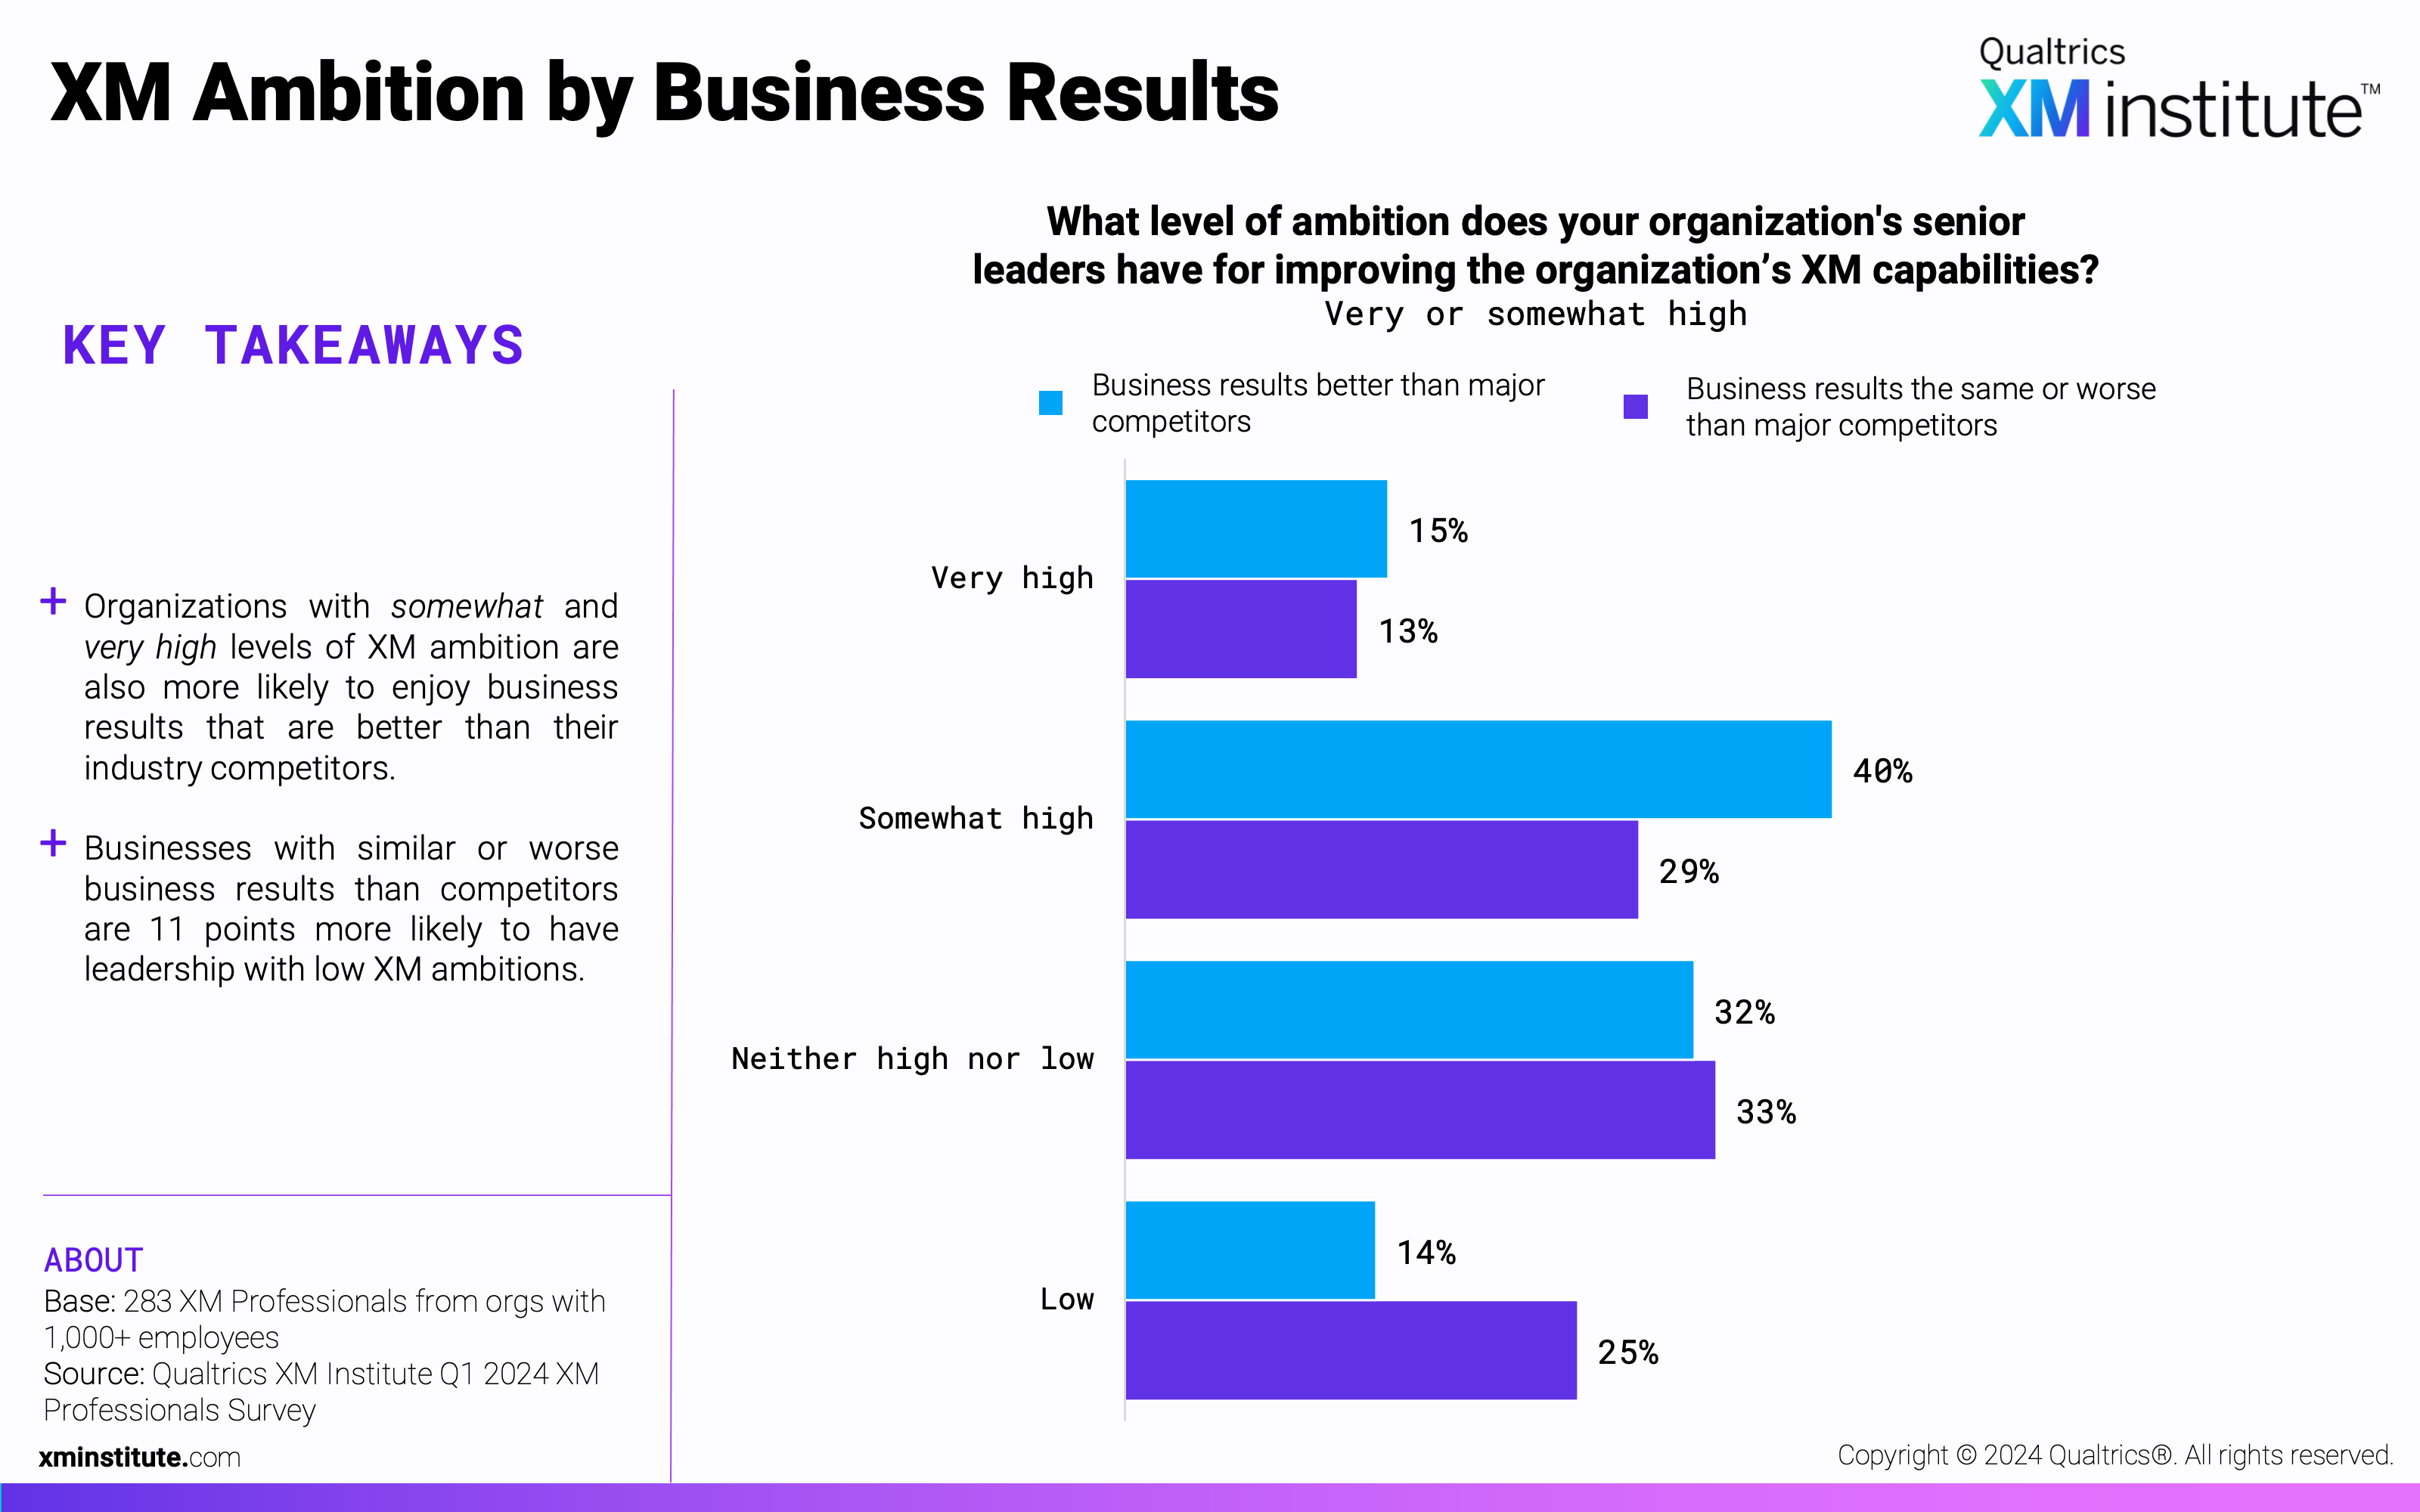 This chart shows how much XM ambition respondents' organizations' senior leaders have according to their business results. 